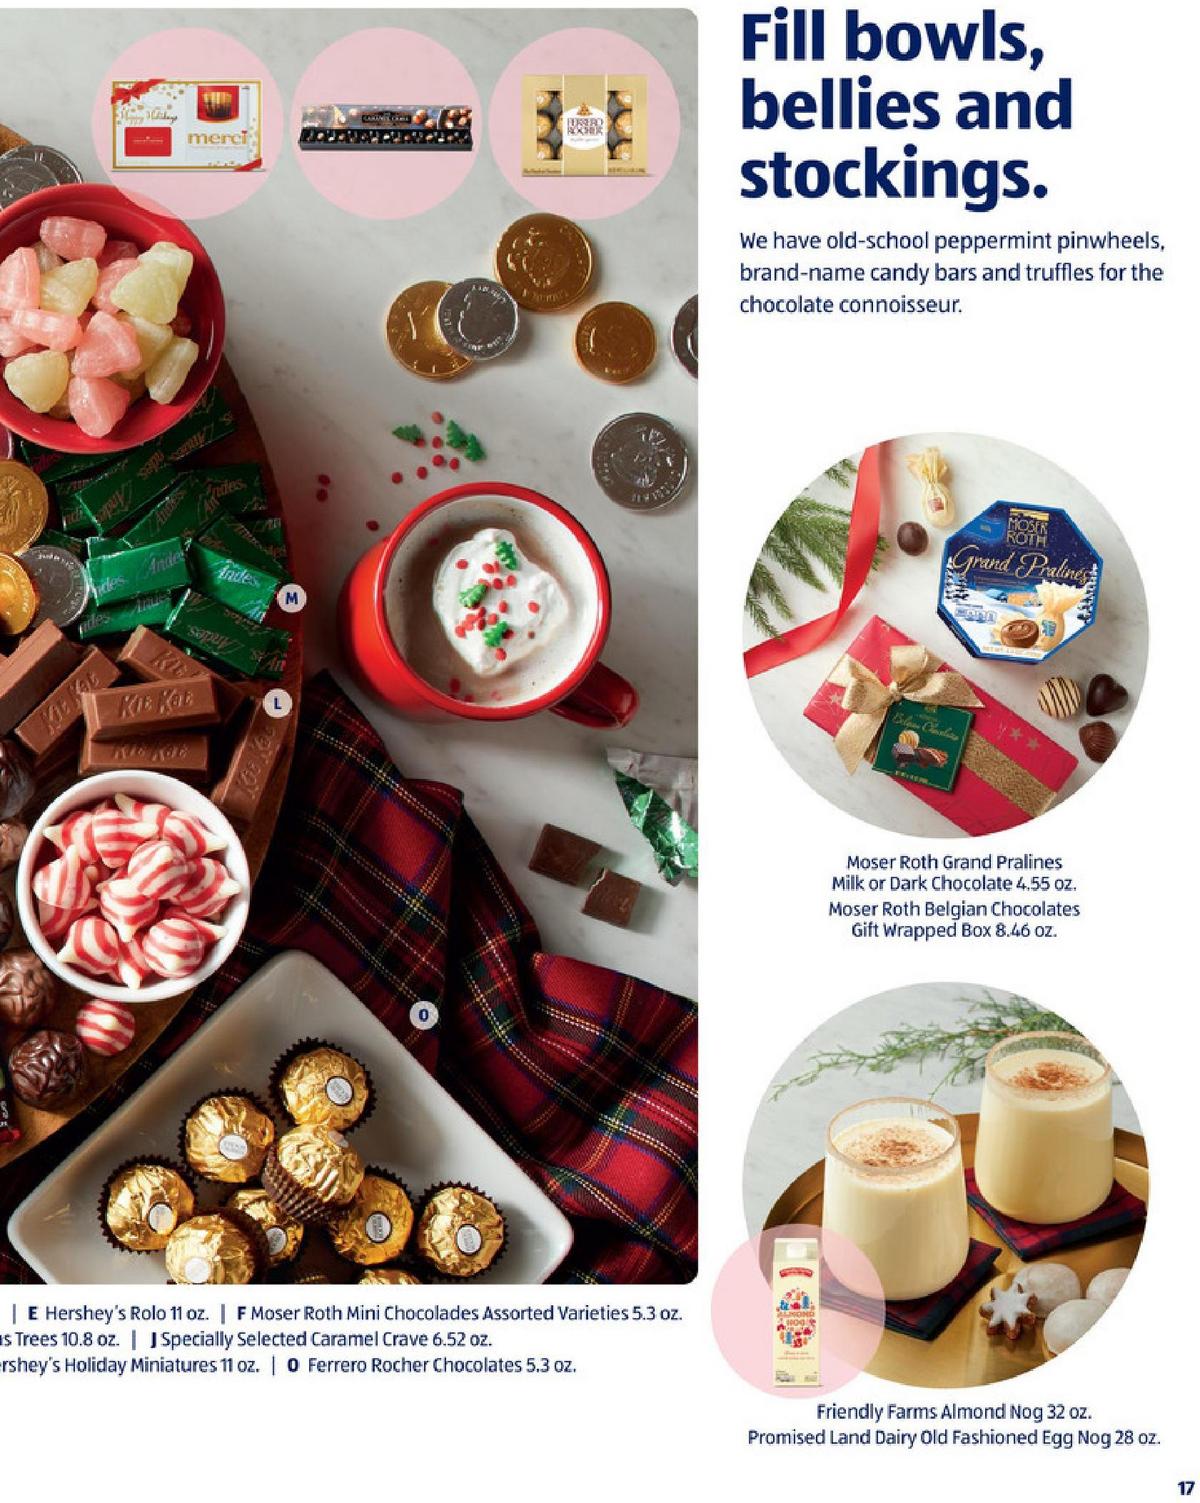 ALDI Christmas Catalog US Weekly Ads & Special Buys from November 18